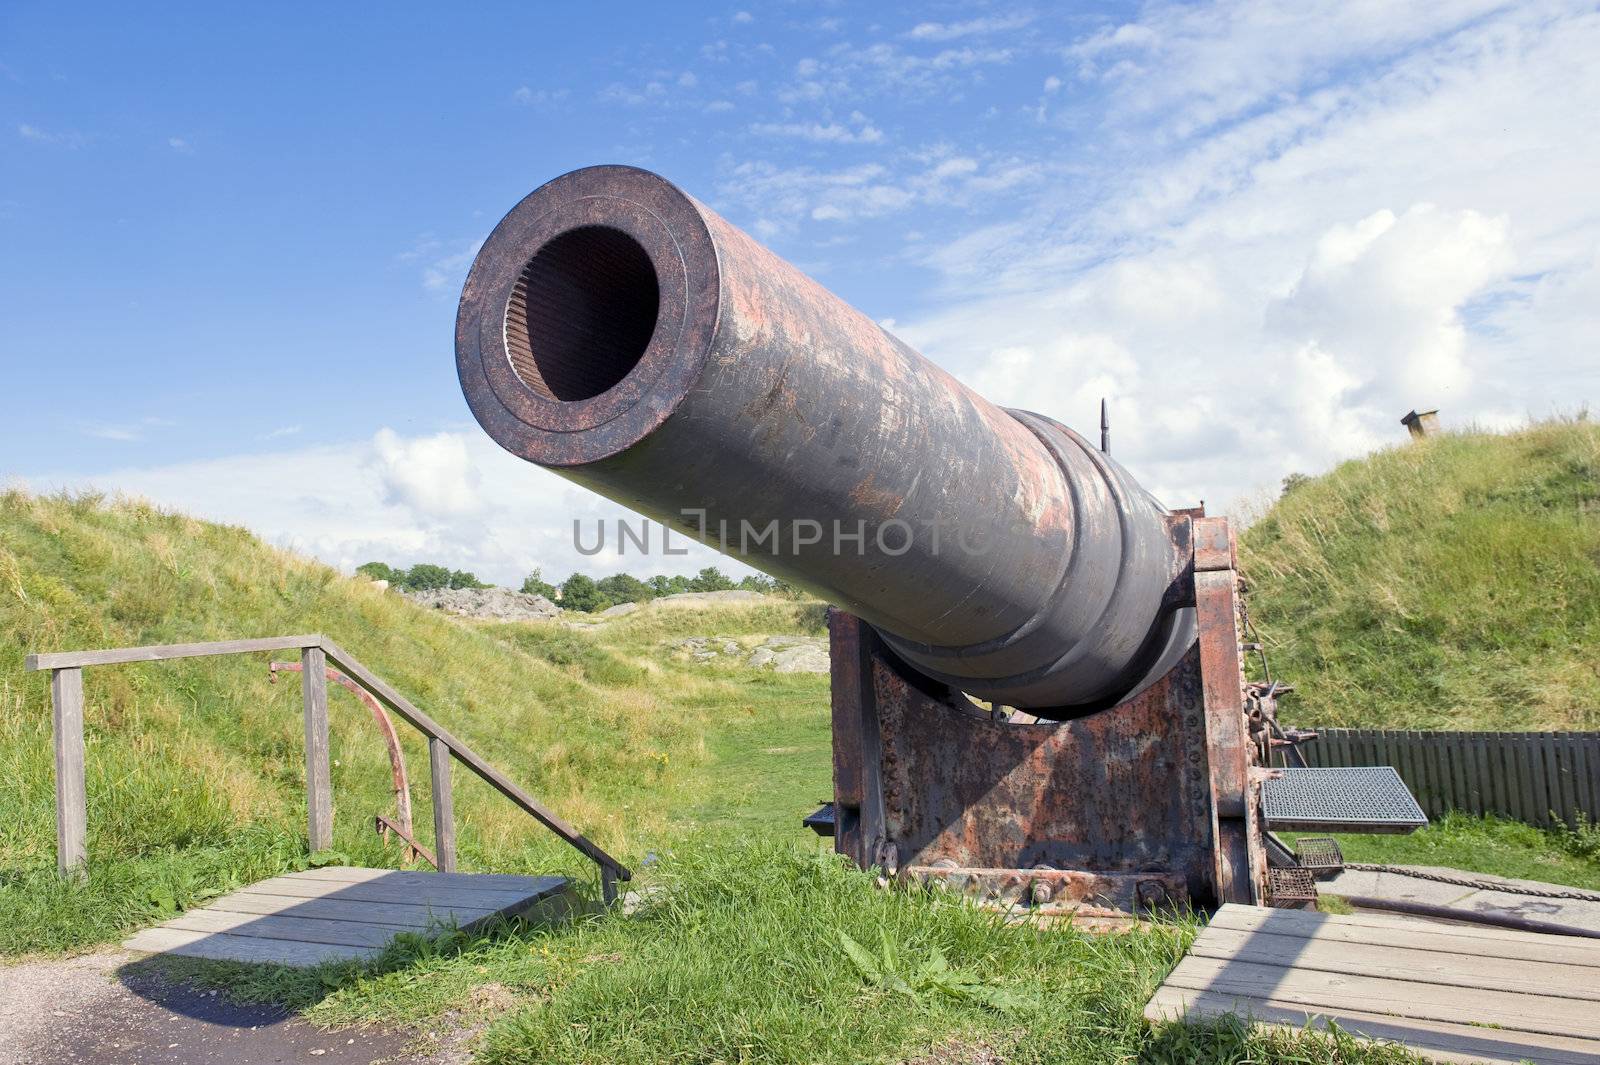 Old gun  in a fortress of Sveaborg, Finland. Taken on July 2011.